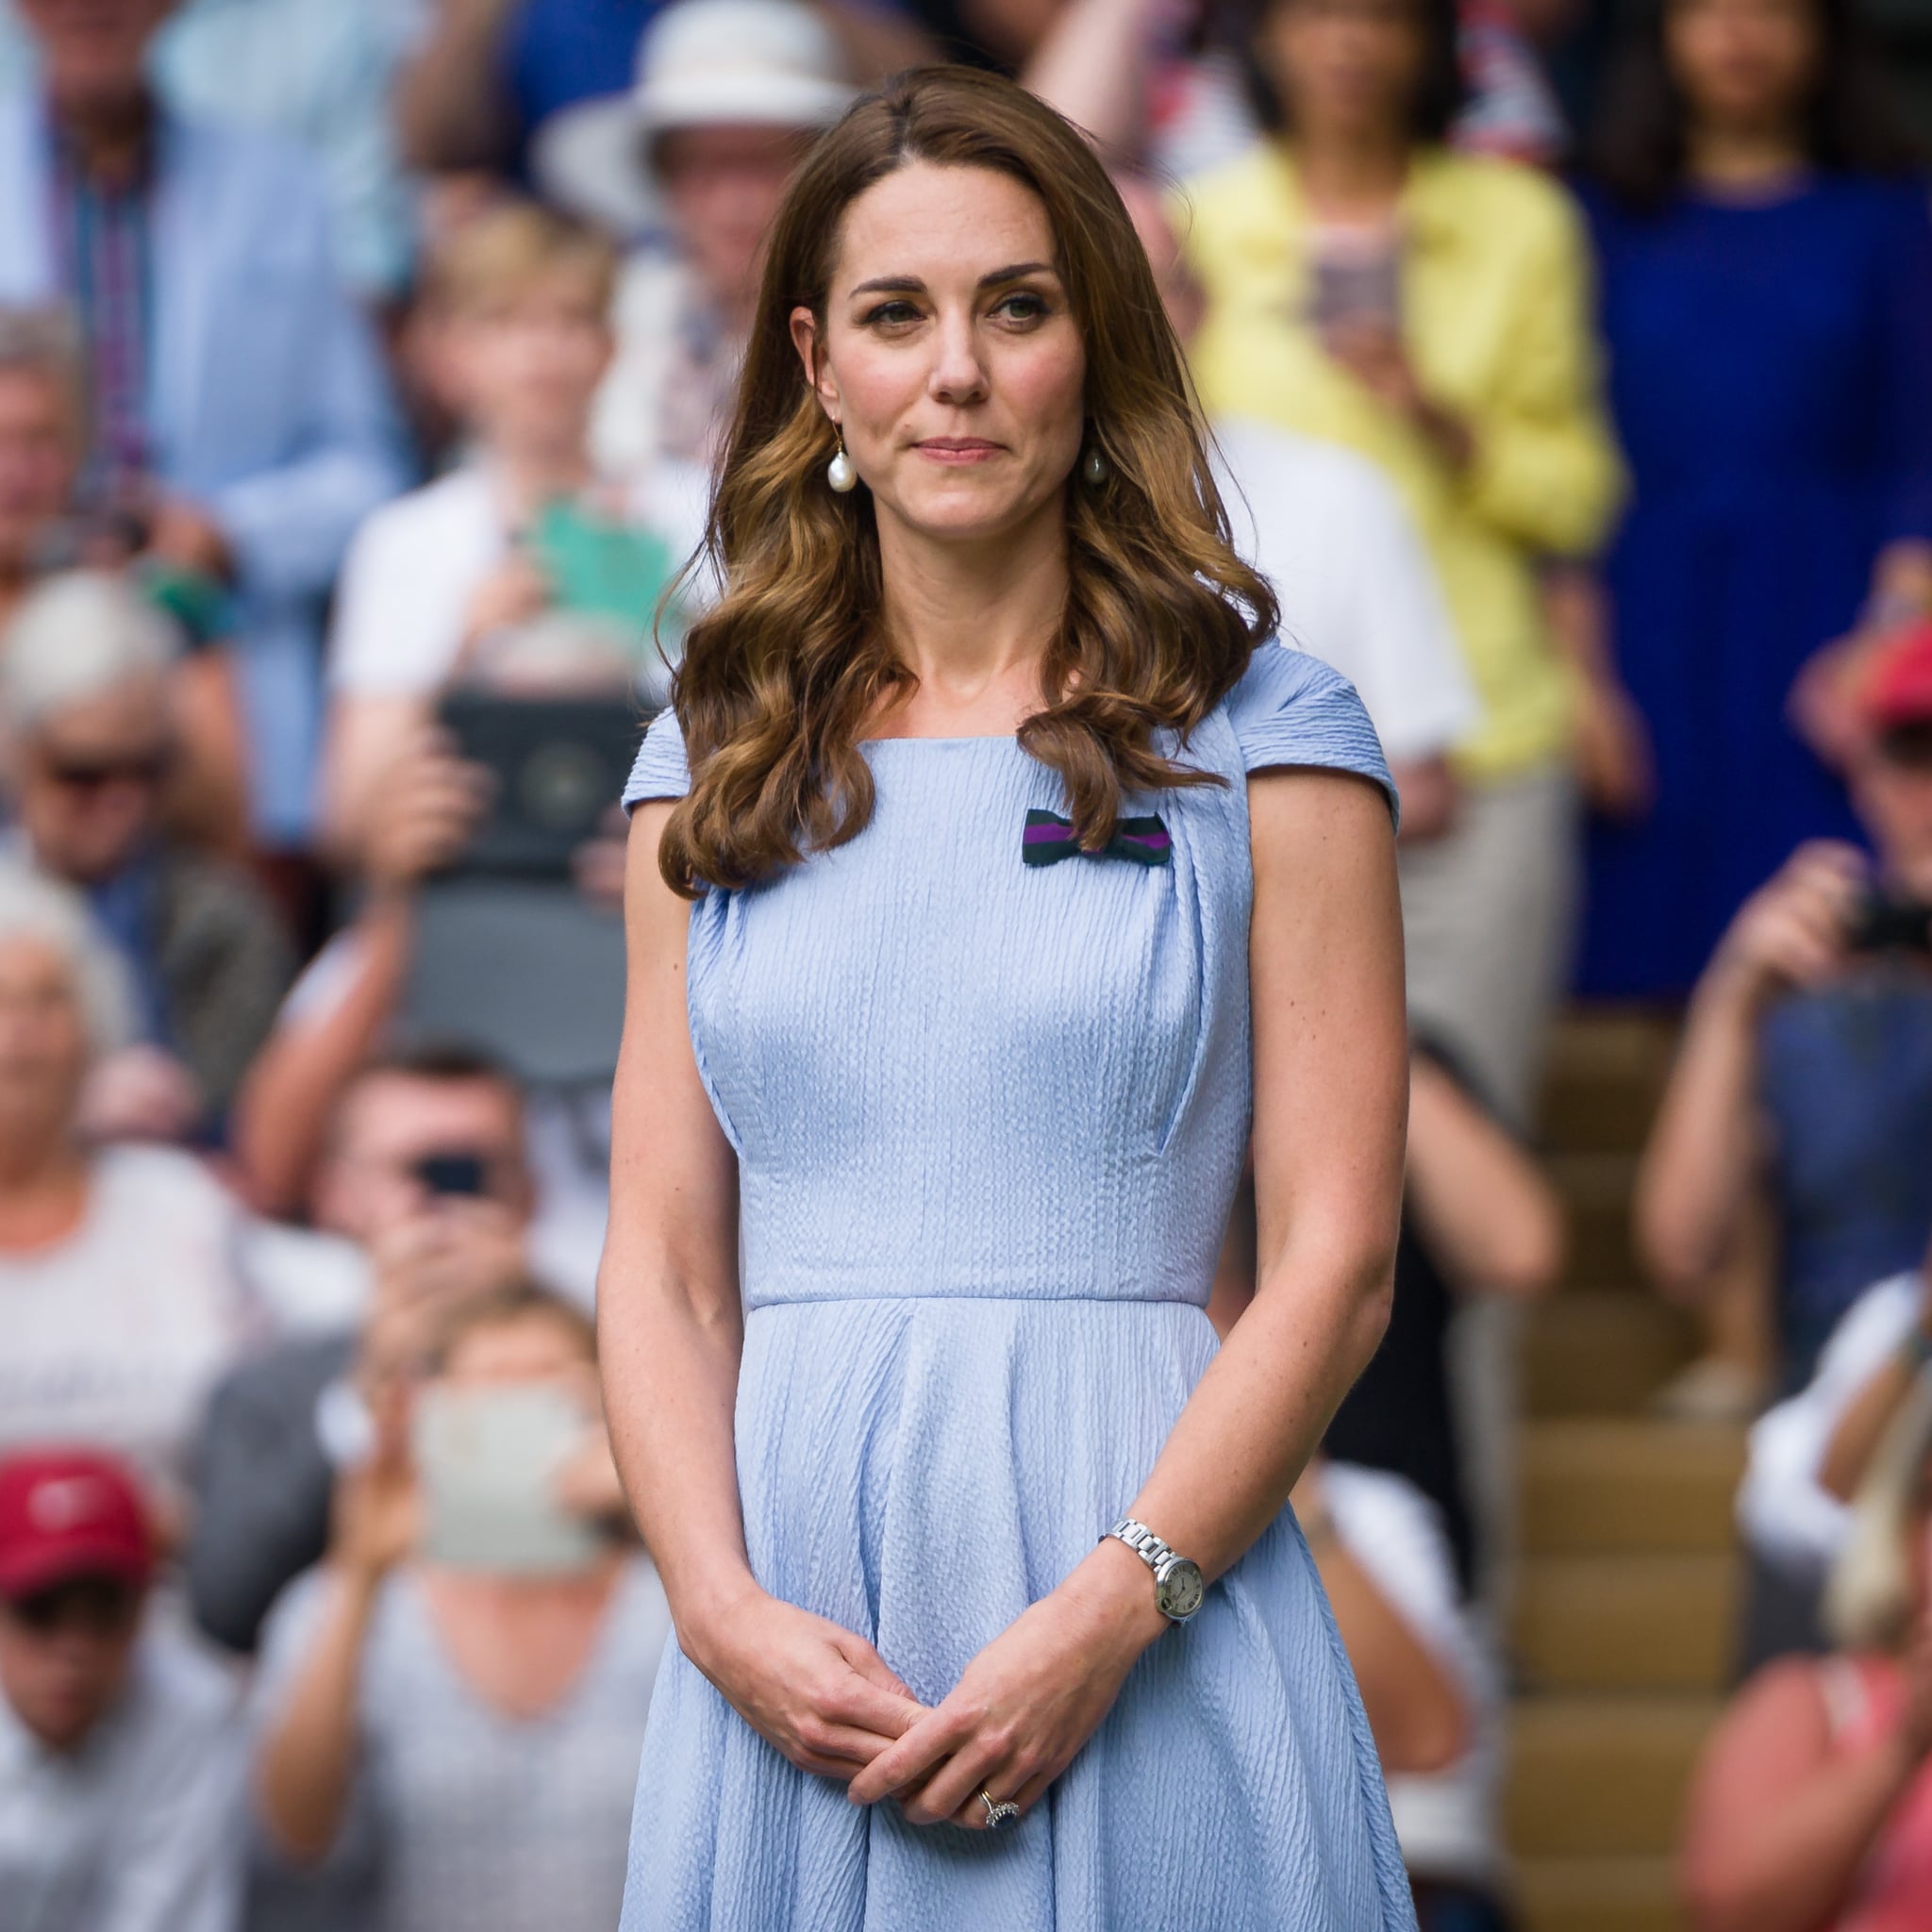 LONDON, ENGLAND - JULY 14: Catherine Duchess of Cambridge looks on after the Men's Singles final between Novak Djokovic of Serbia and Roger Federer of Switzerland during Day thirteen of The Championships - Wimbledon 2019 at All England Lawn Tennis and Croquet Club on July 14, 2019 in London, England. (Photo by Andy Cheung/Getty Images)